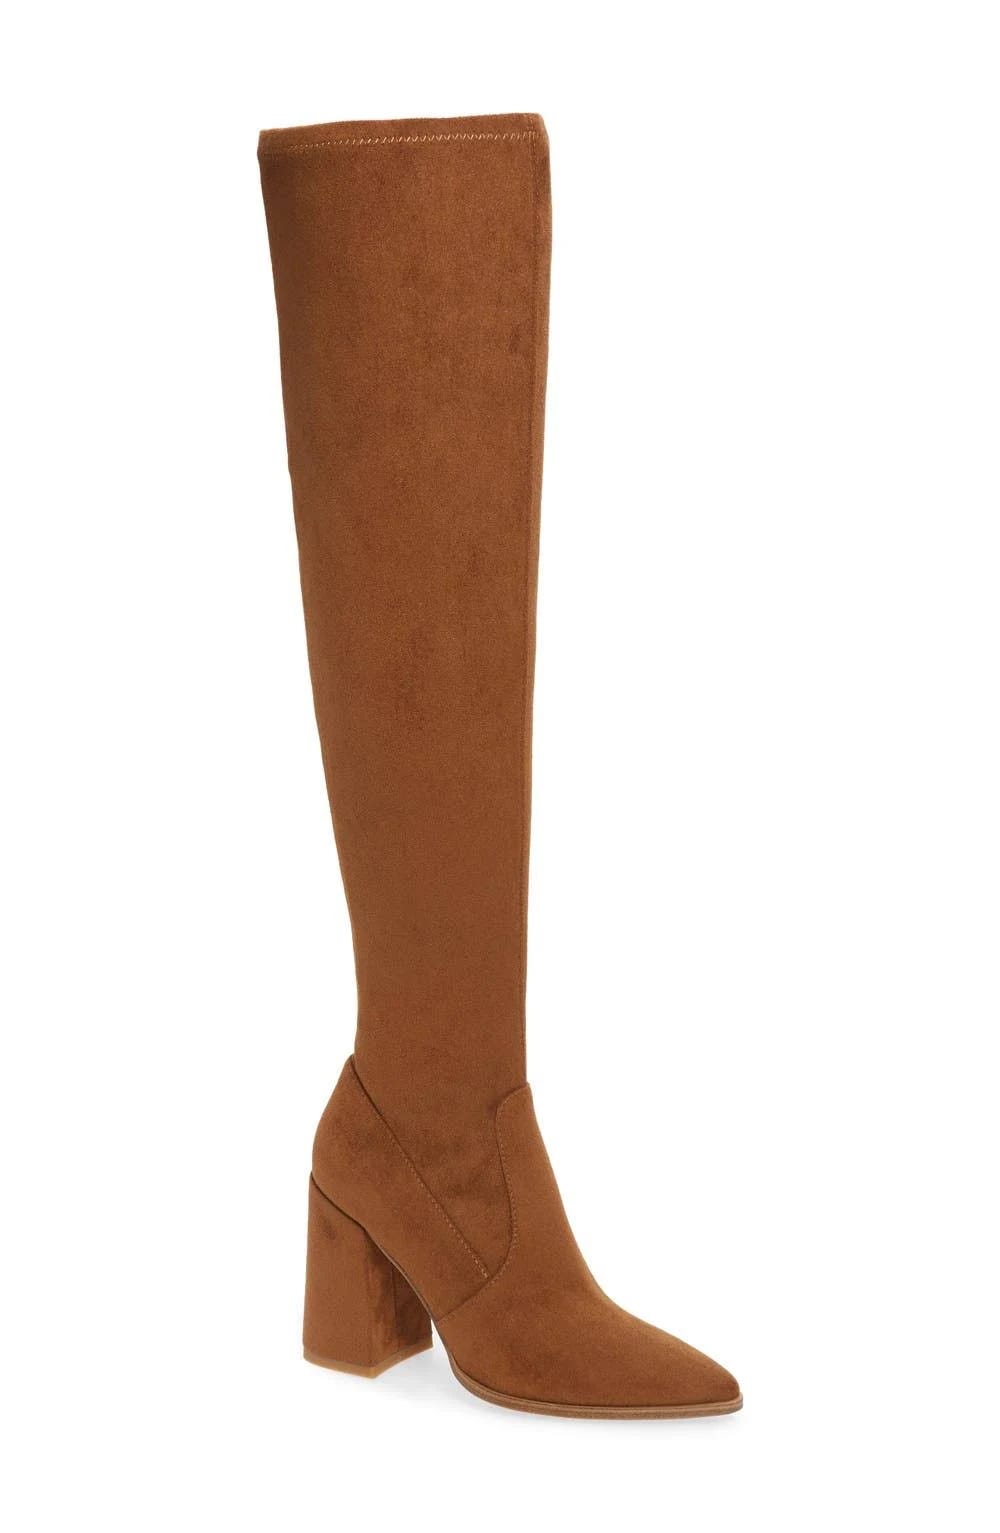 Stylish Over-the-Knee Boot in Cognac Color from Steve Madden | Image